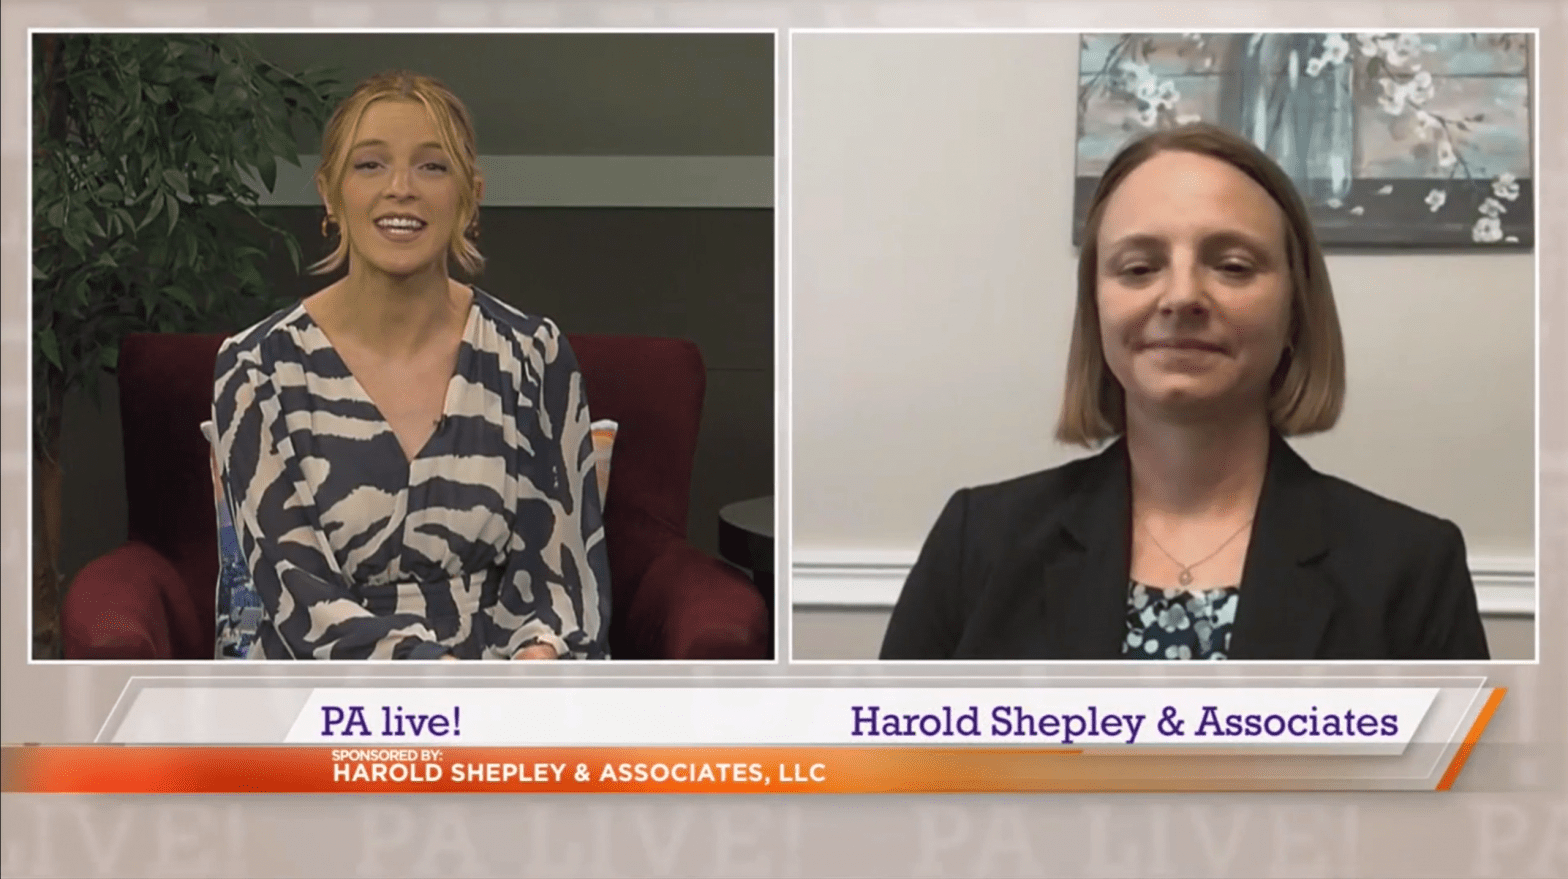 PA LIVE! Harold Shepley & associates with two woman smiling at the camera